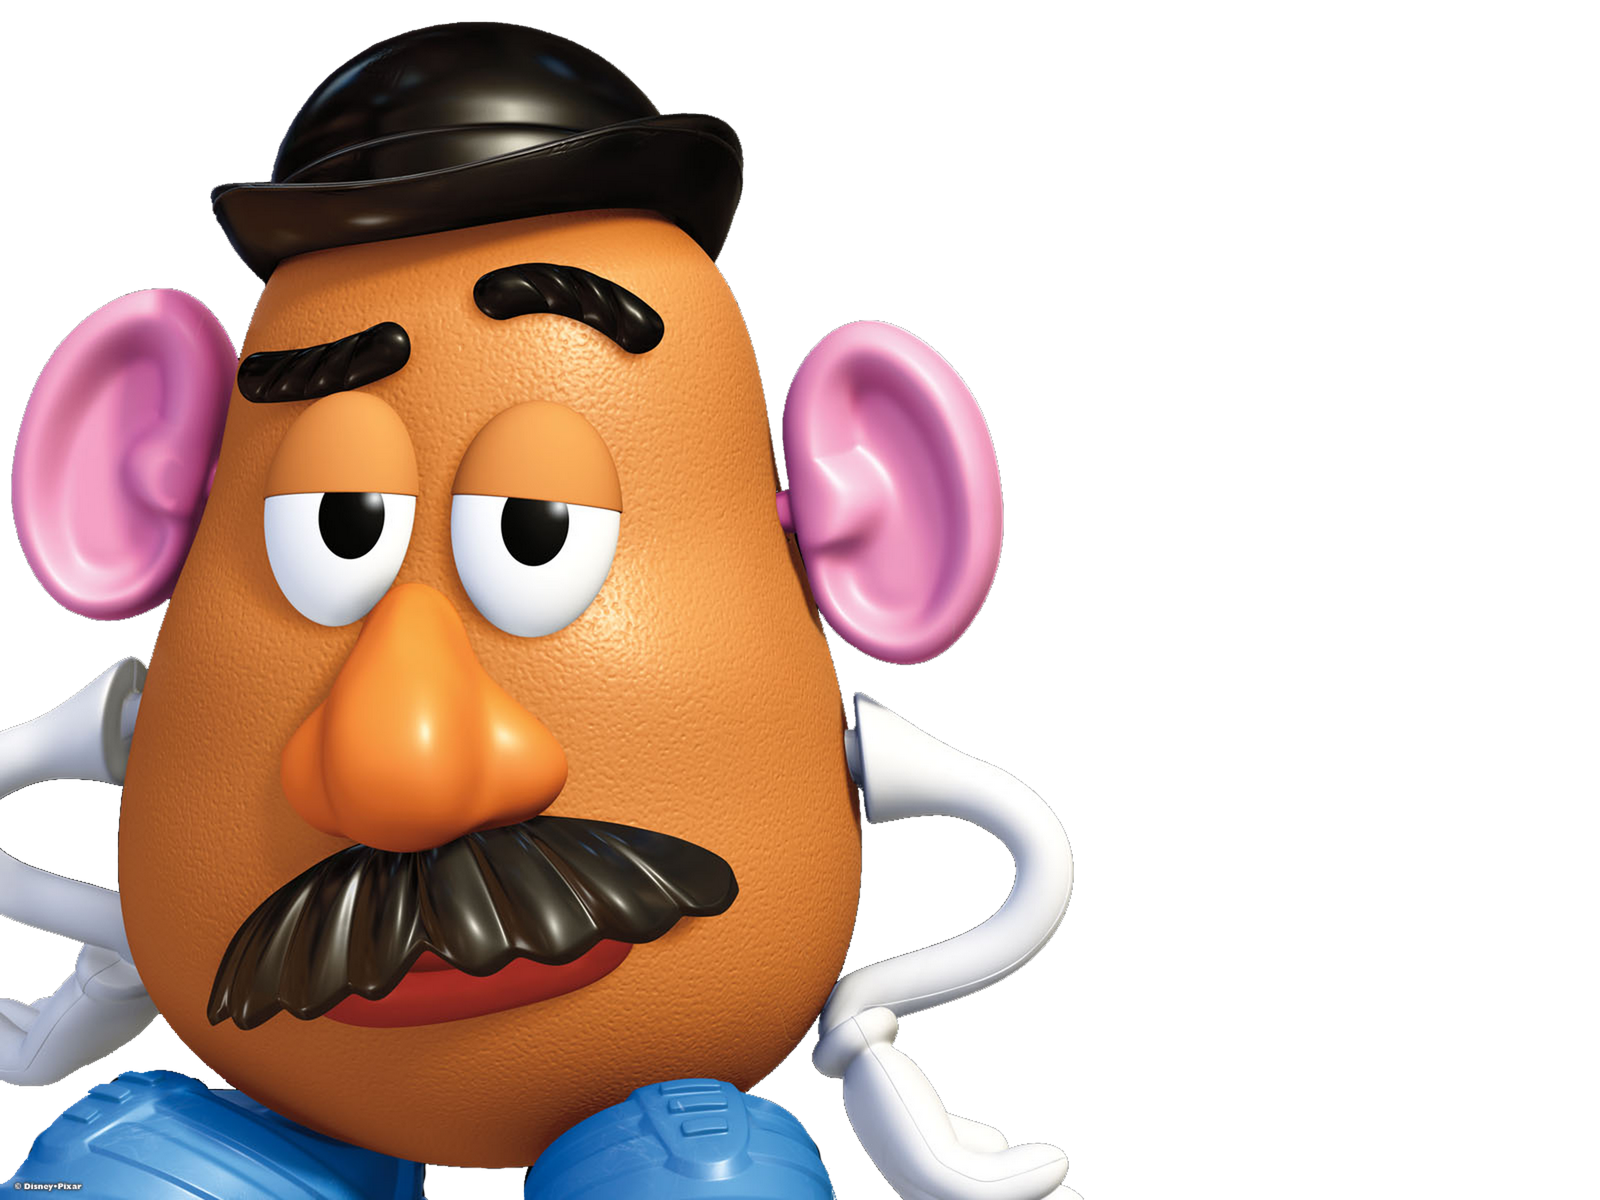 jouet monsieur patate toy story